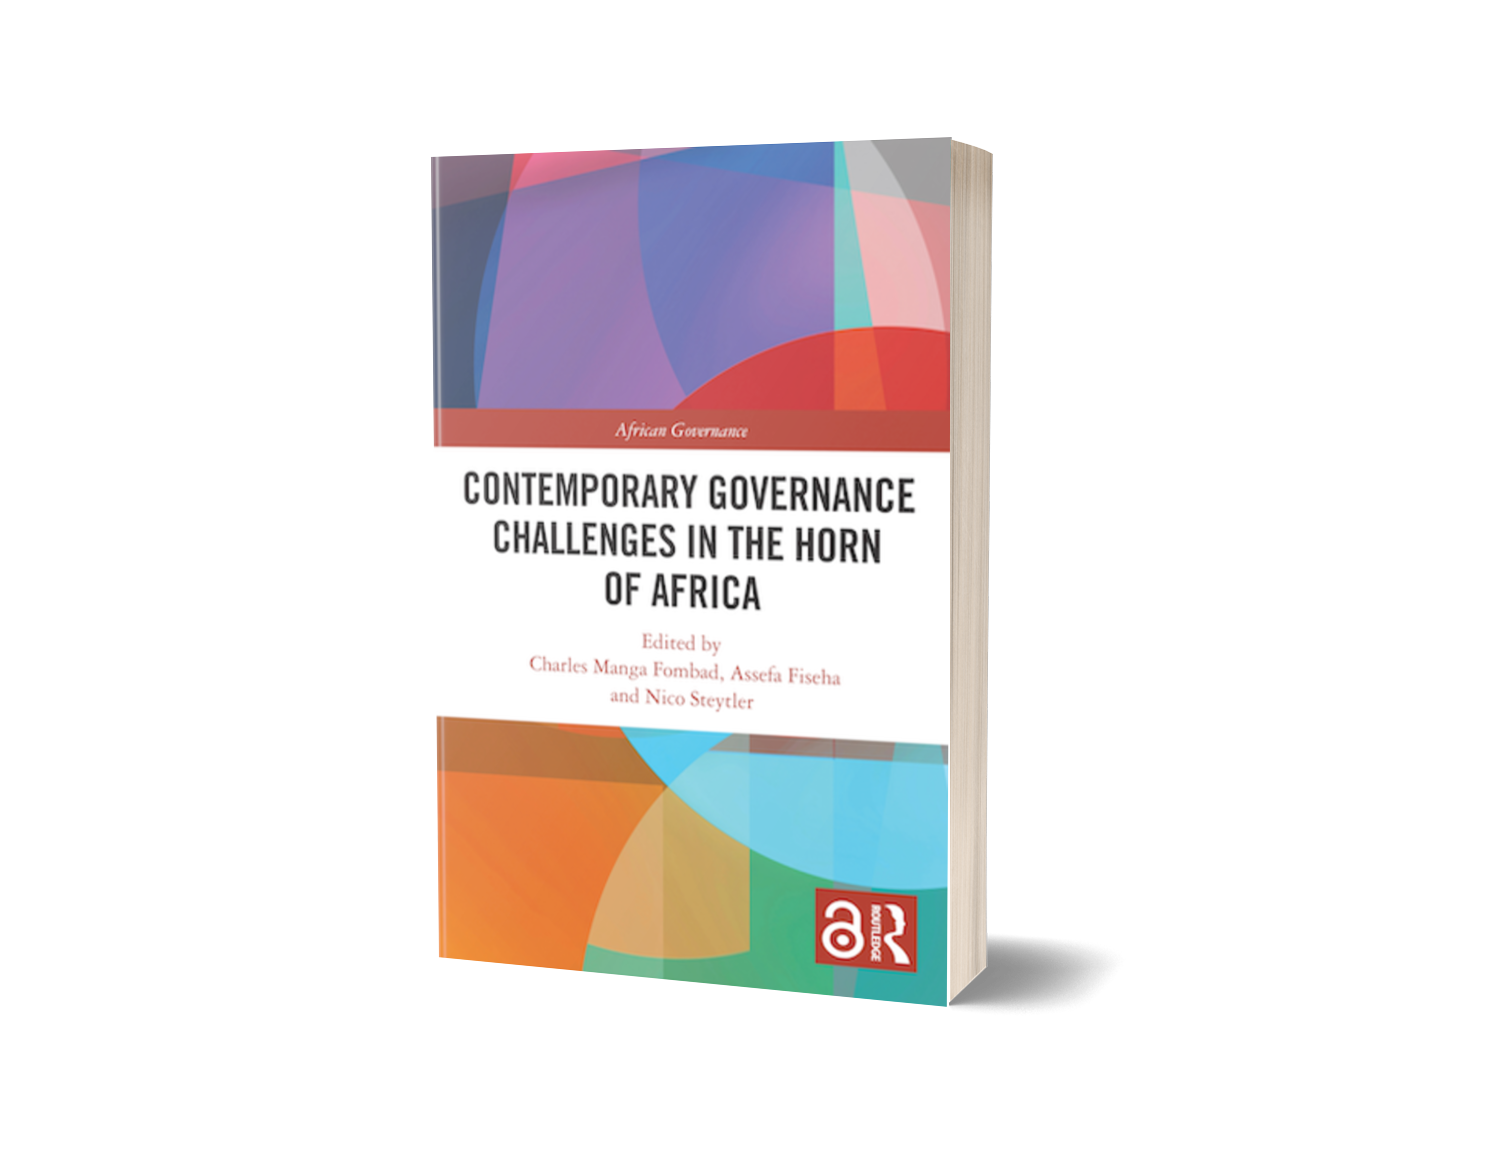 Steytler, Nico (with Charles Fombad and Assefa Fiseha) (eds.) Contemporary Governance Challenges in the Horn of Africa (Routledge, 2023)